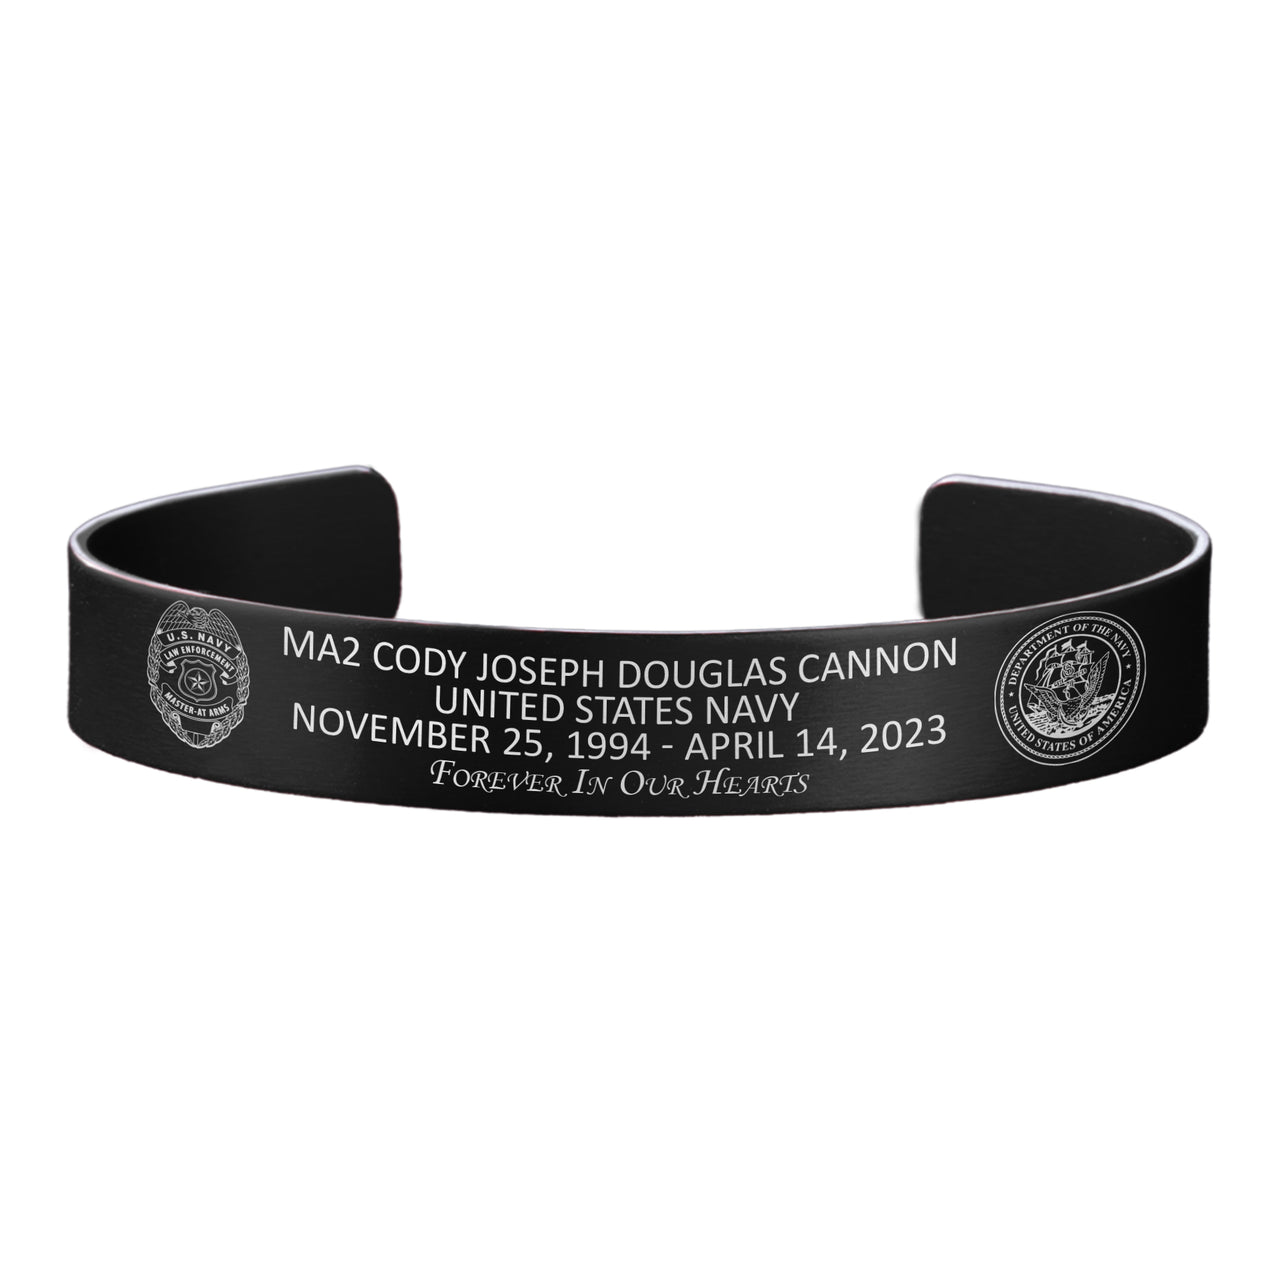 MA2 Cody Joseph Douglas Cannon Memorial Band – Hosted by the Cannon Family